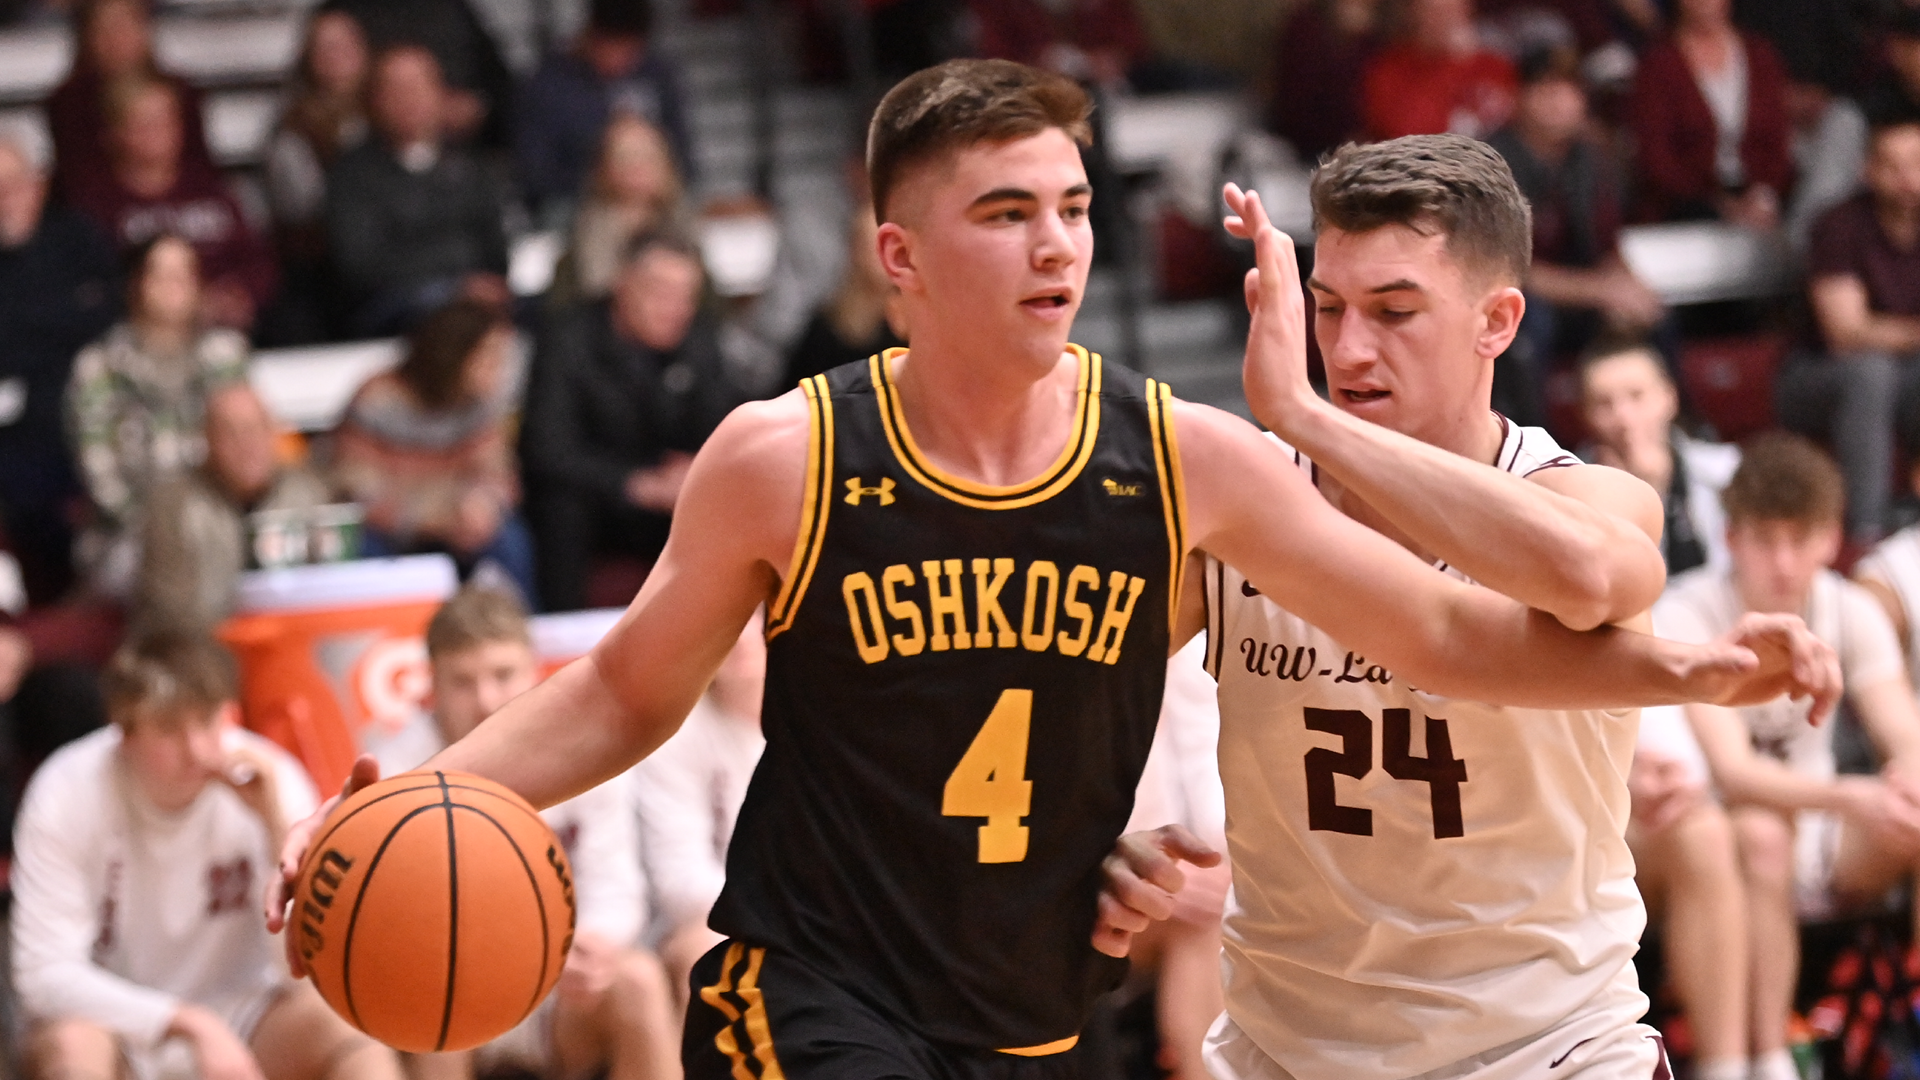 Michael Metcalf-Grassman scored 19 points and pulled down nine rebounds in the Titans' loss at UW-La Crosse on Wednesday night. Photo Credit: Jim Lund: UW-La Crosse Sports Information